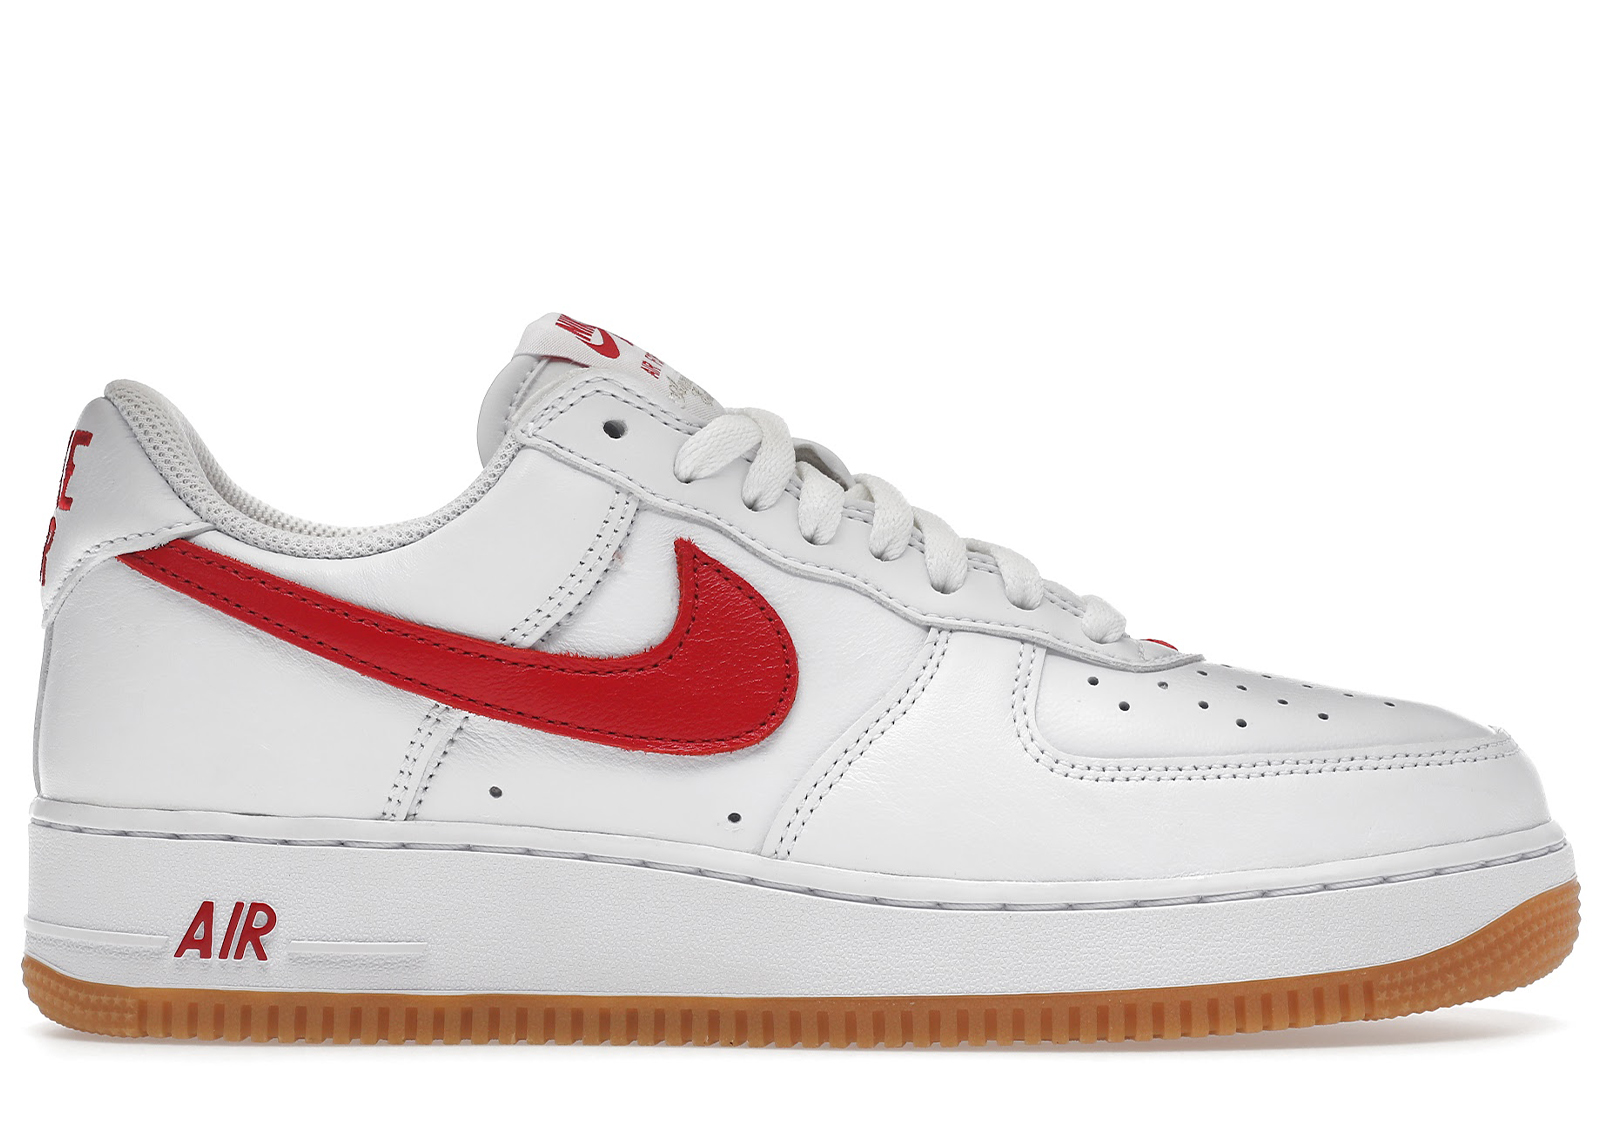 university red air forces